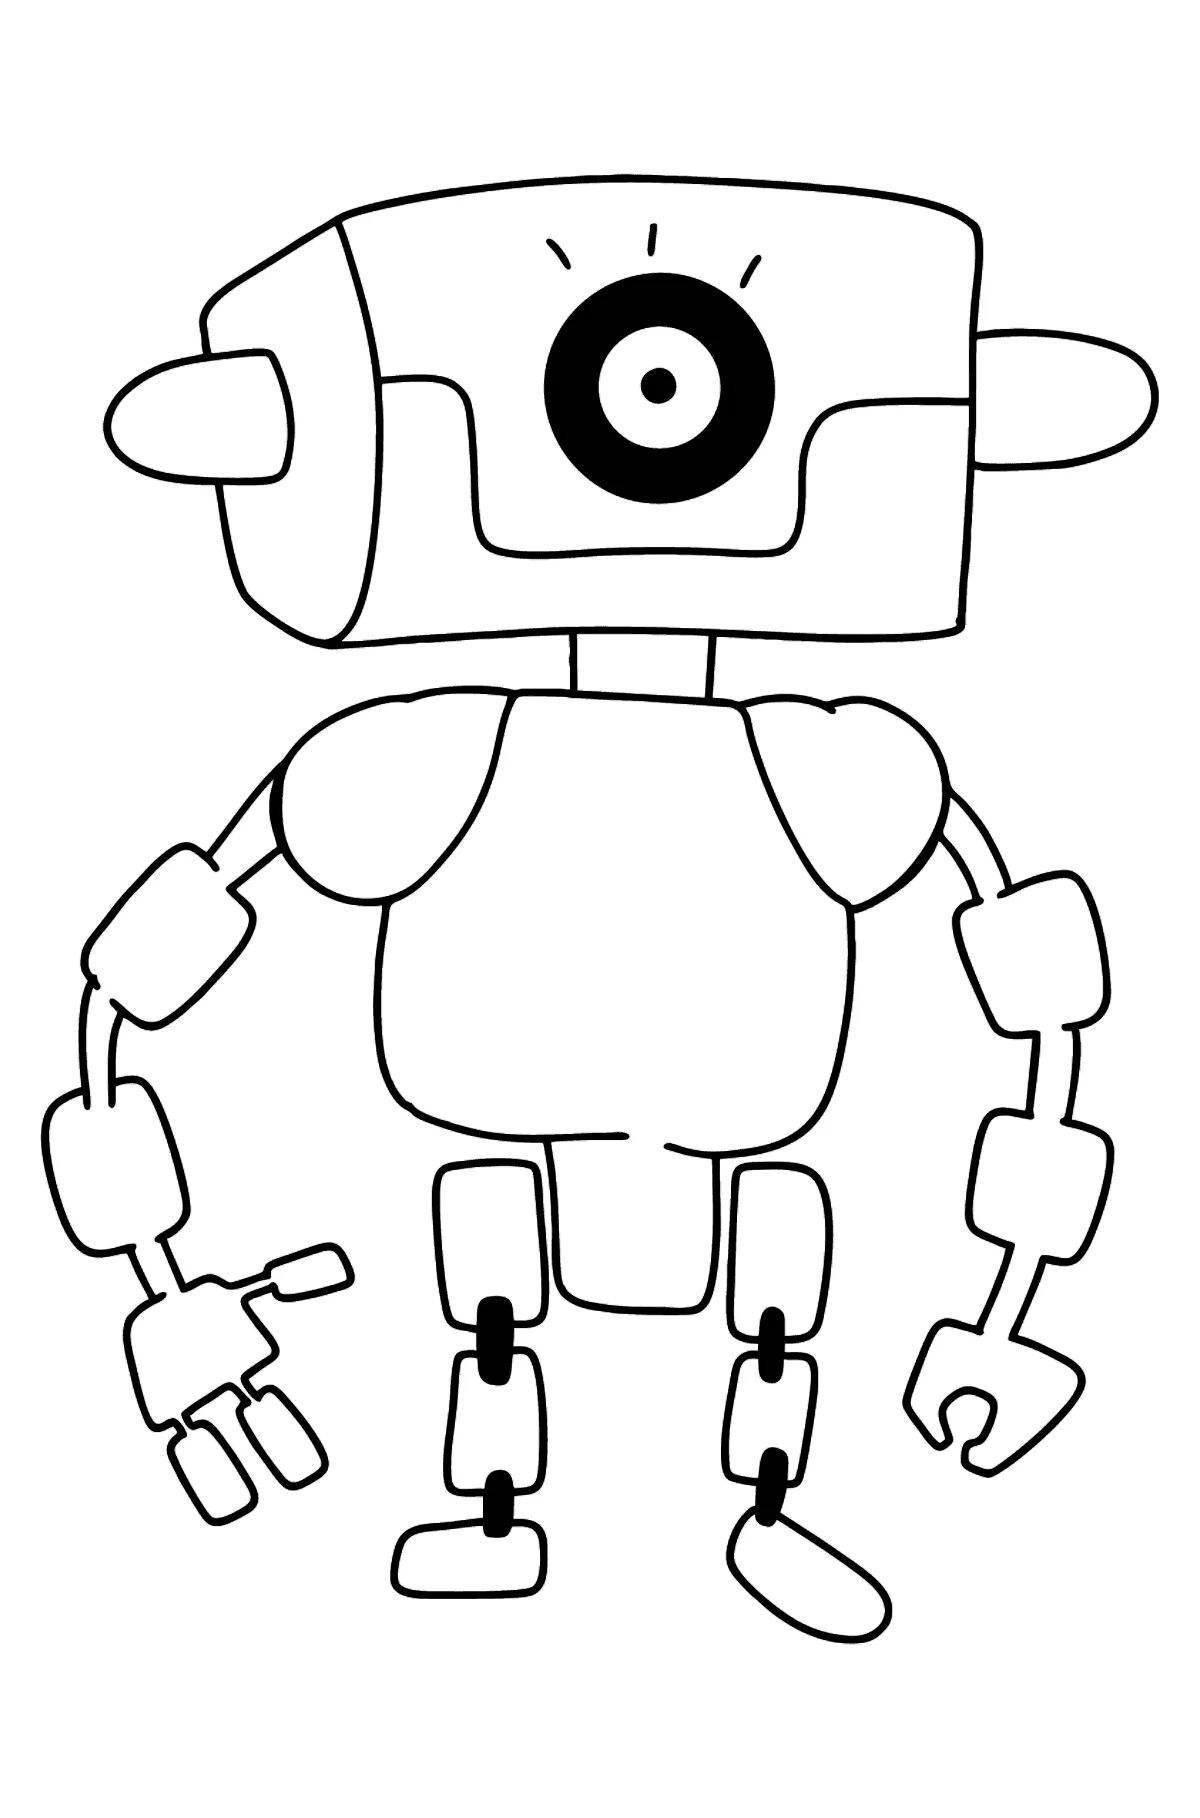 Animated robot cat coloring page